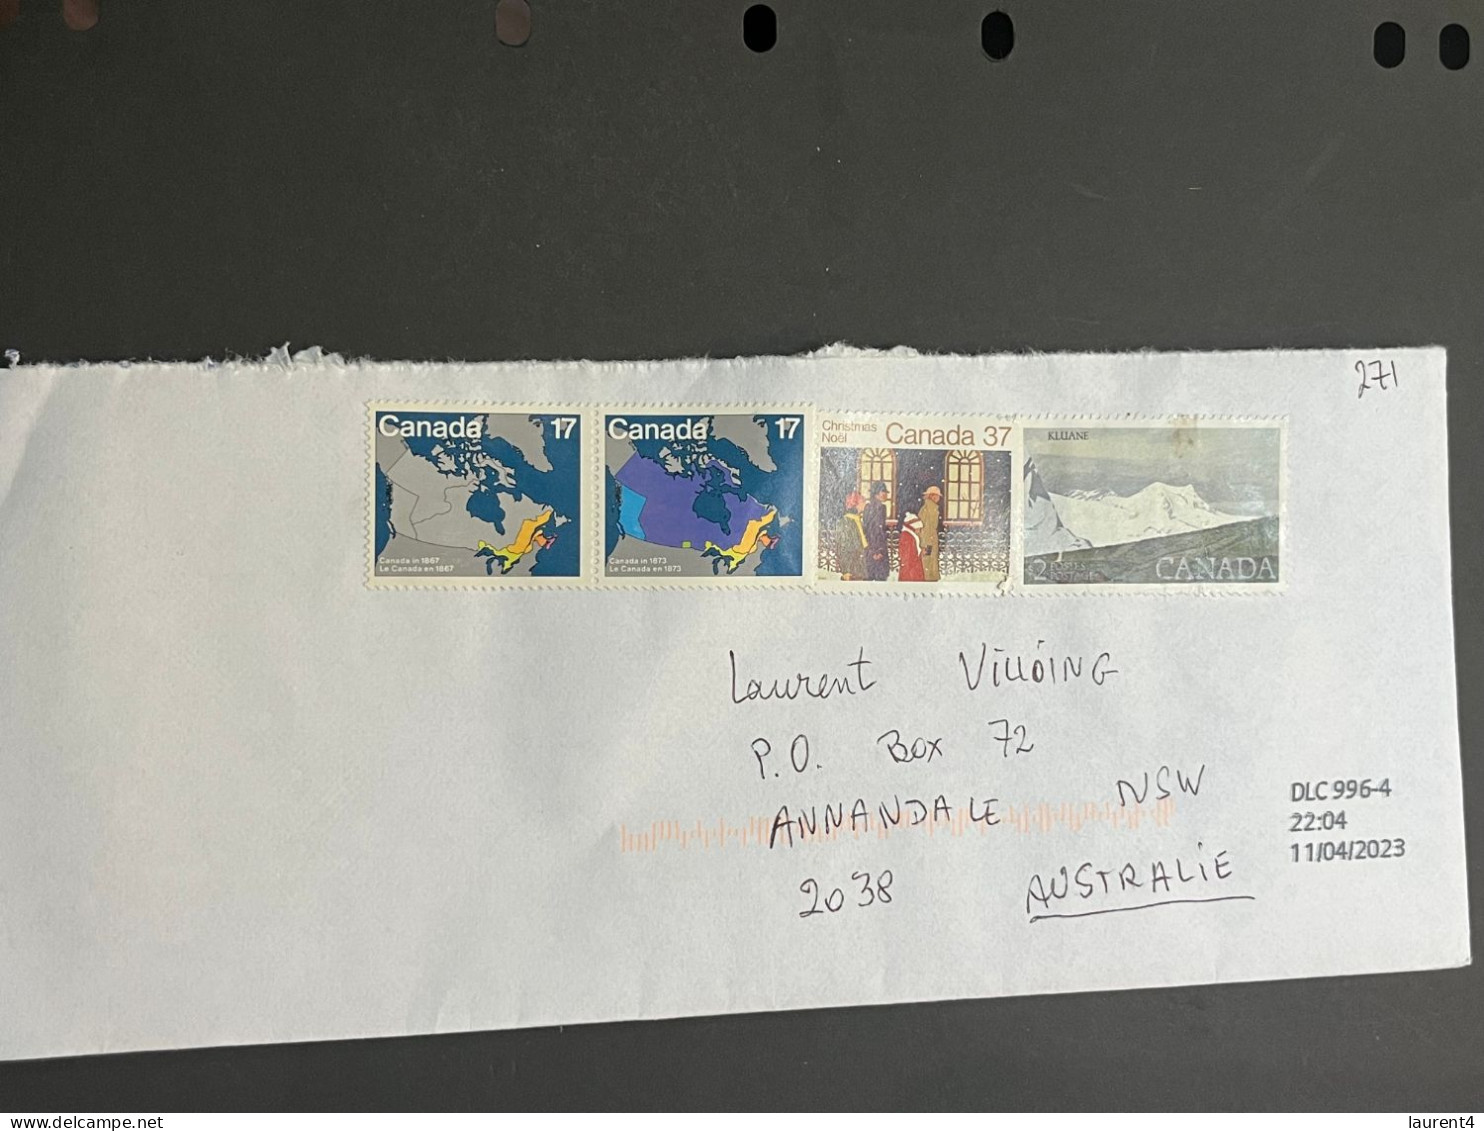 (1 Q 39) Letter Posted From Canada To Australia - 1 Cover (posted During COVID-19) 4 Stamps (no Postmark) - Covers & Documents